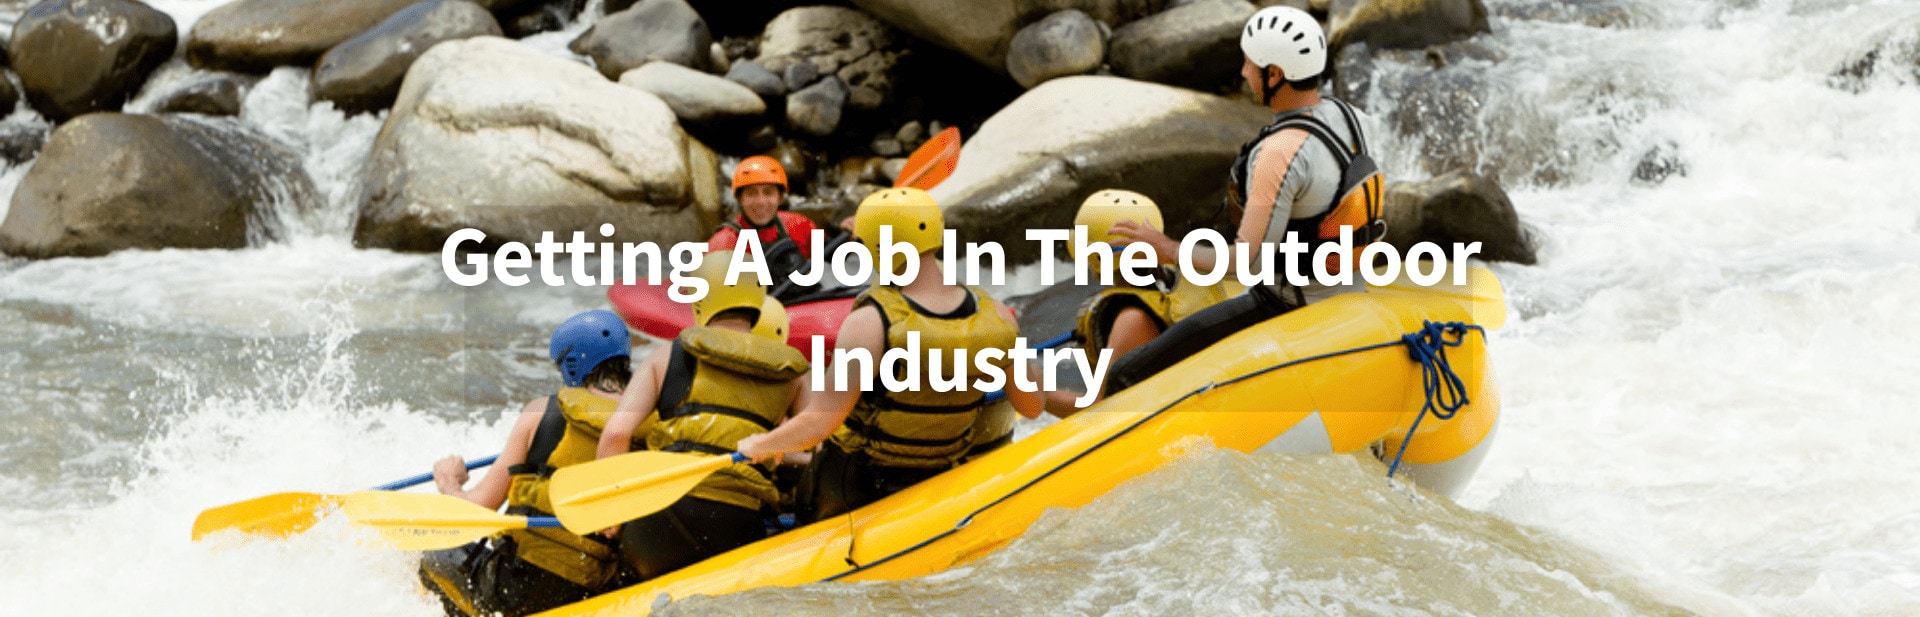 How To Get A Job In The Outdoor Industry: Advice From An Outdoor Expert